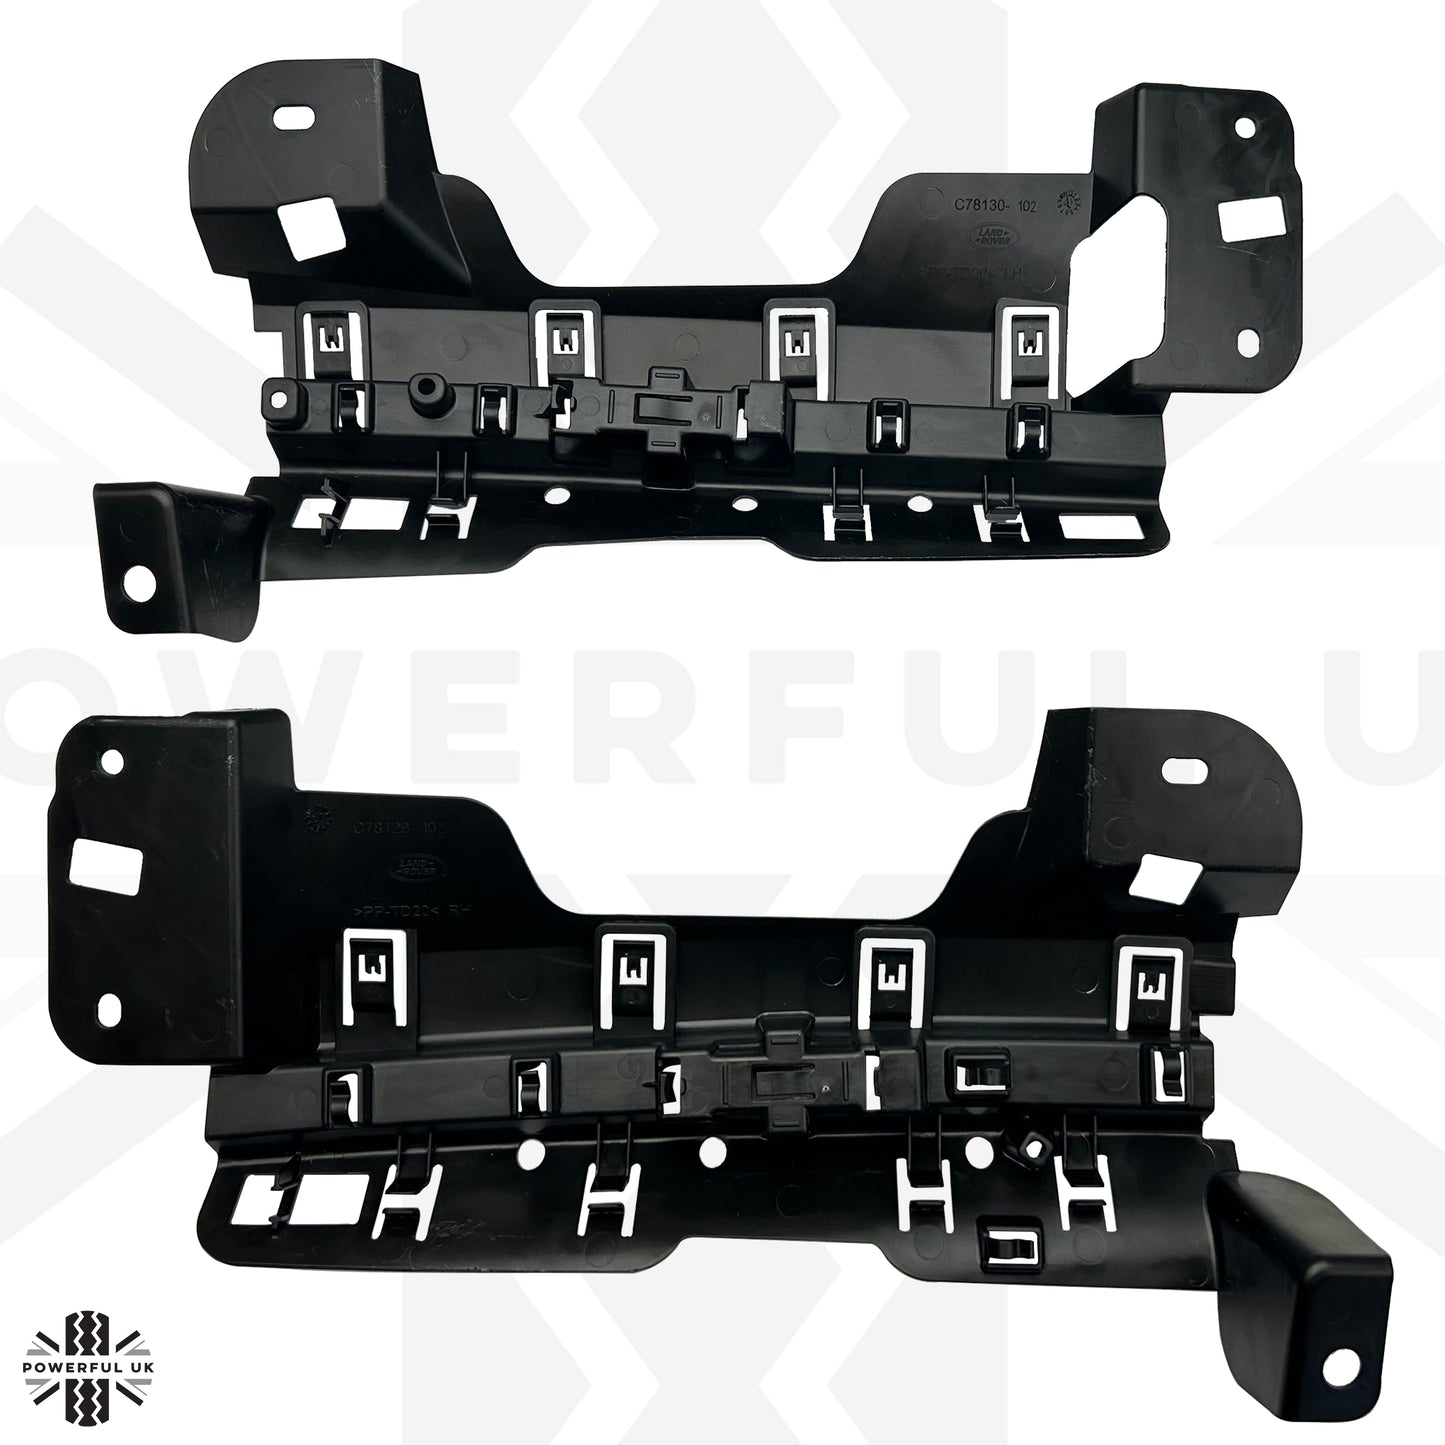 Genuine Gesture Tailgate Module Brackets Only for Range Rover L405